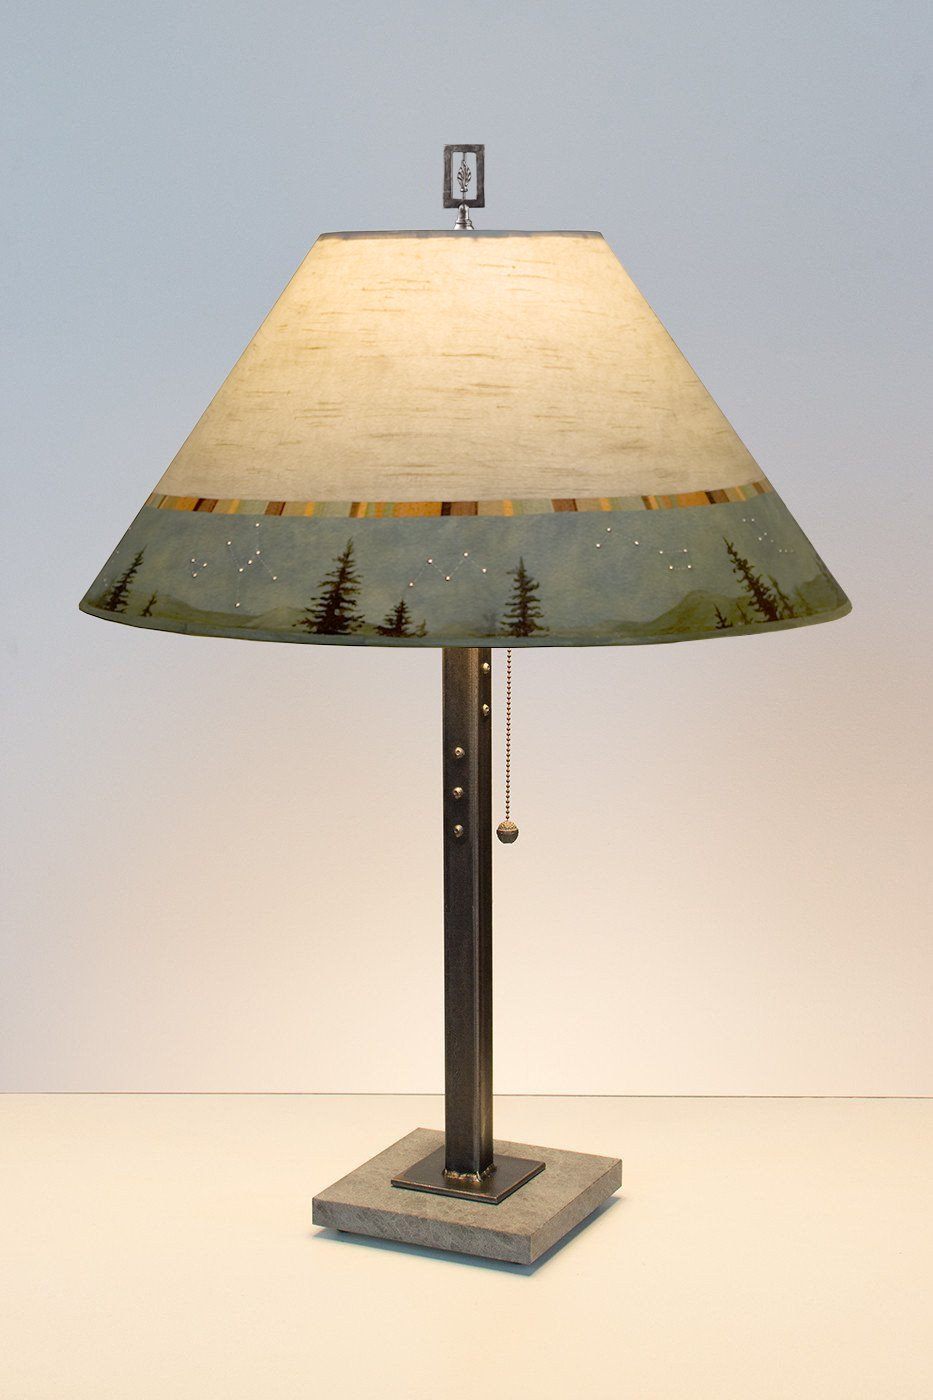 Janna Ugone & Co Table Lamps Steel Table Lamp with Large Conical Shade in Birch Midnight